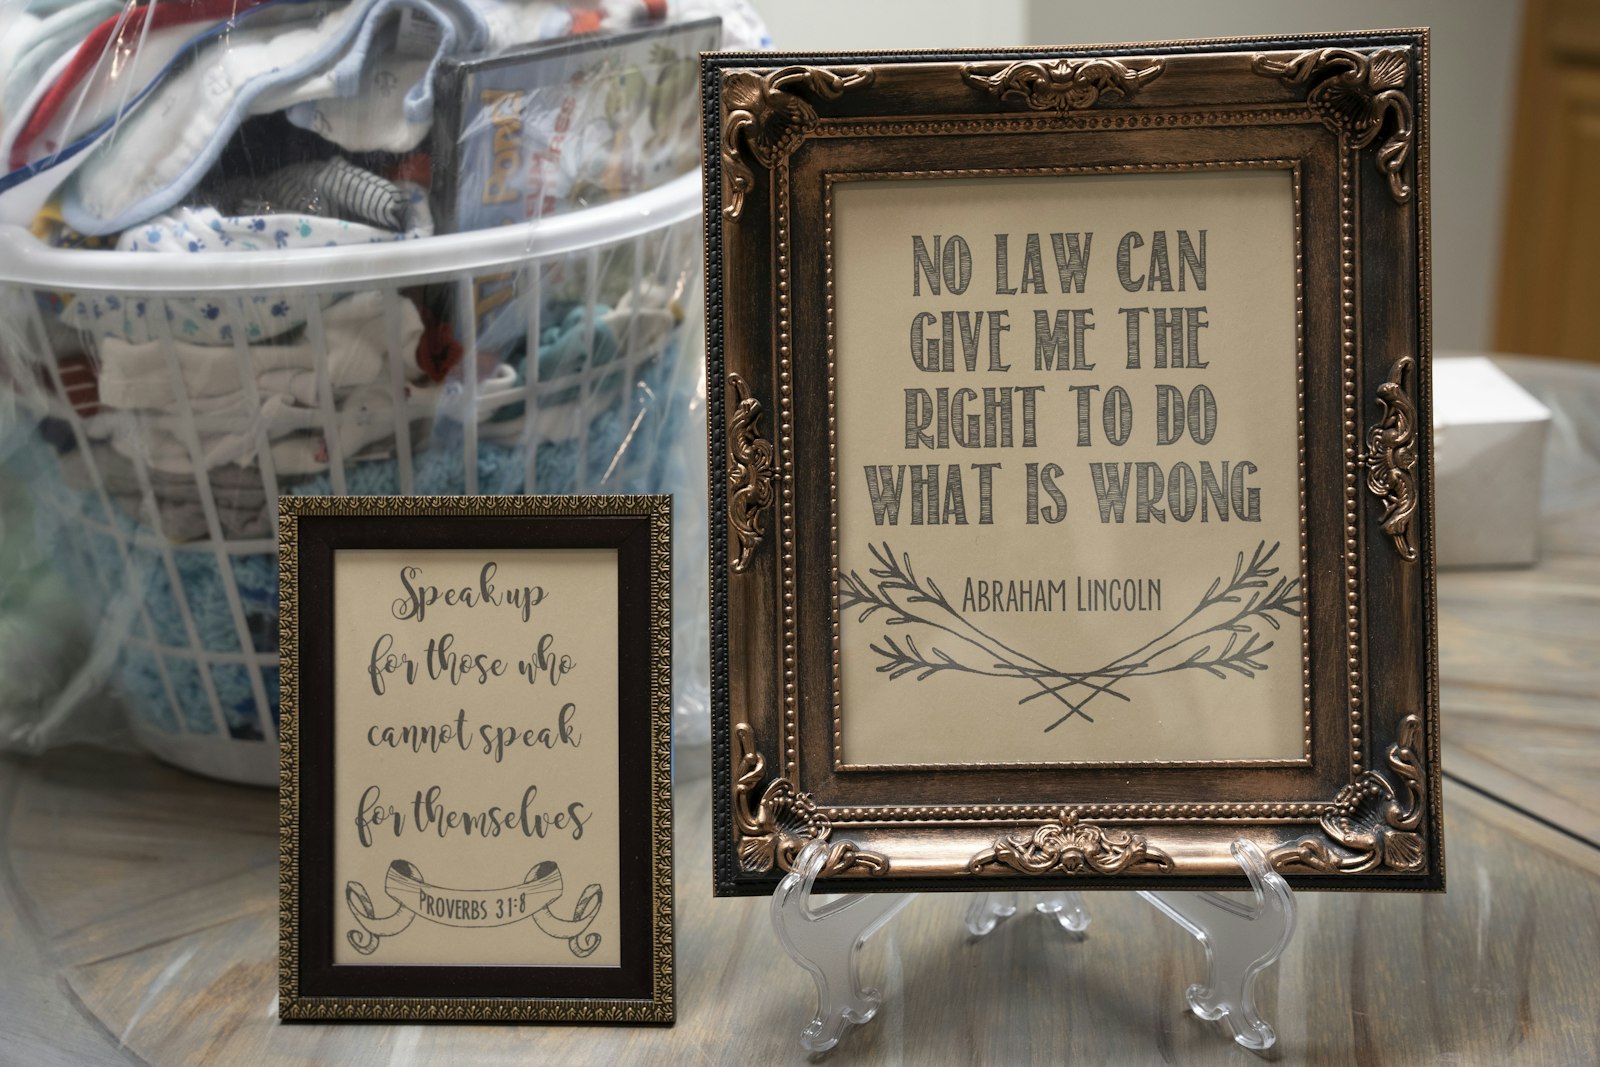 A sign is pictured inside the Planned Choices pregnancy center in Allen Park featuring a quote from Abraham Lincoln, "No law can give me the right to do what is wrong." (Gabriella Patti | Detroit Catholic)